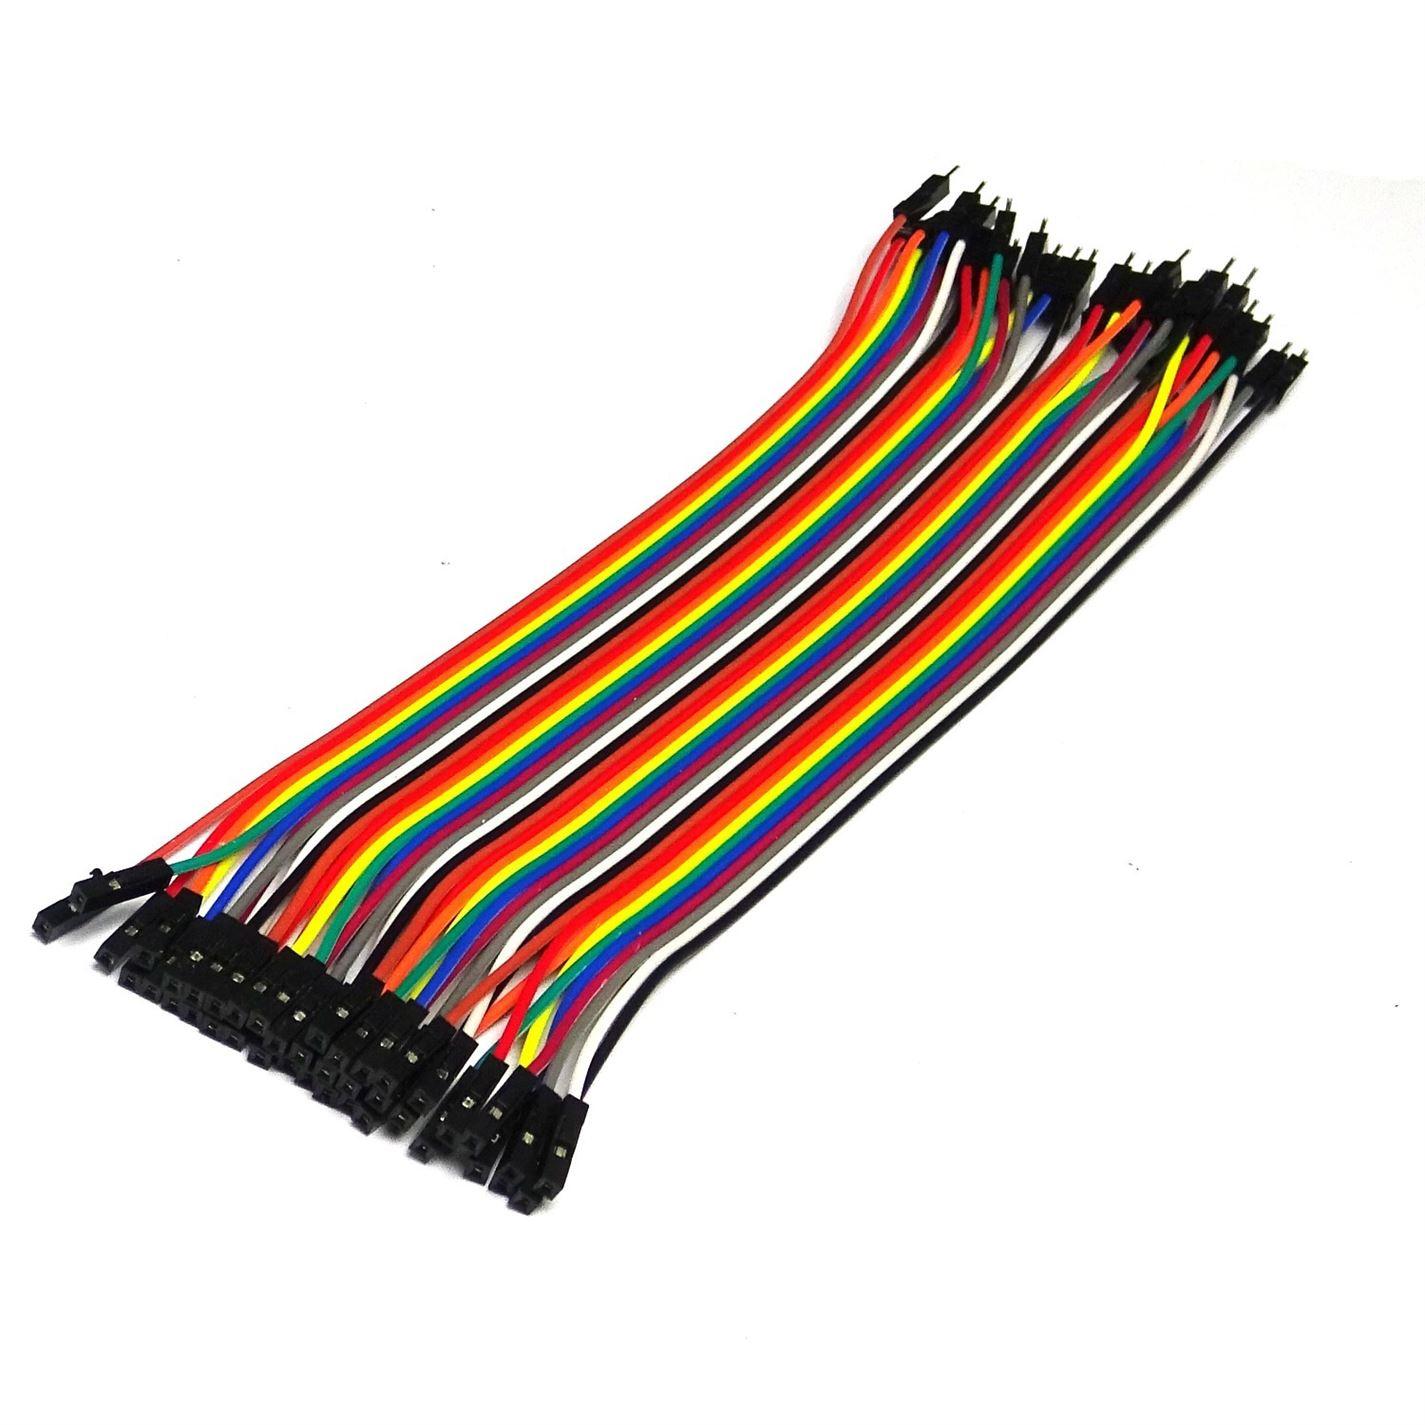 Male to Female 20cm Jumper Wire Dupont connector 2.54mm 40 Wire Strip - UK Seller